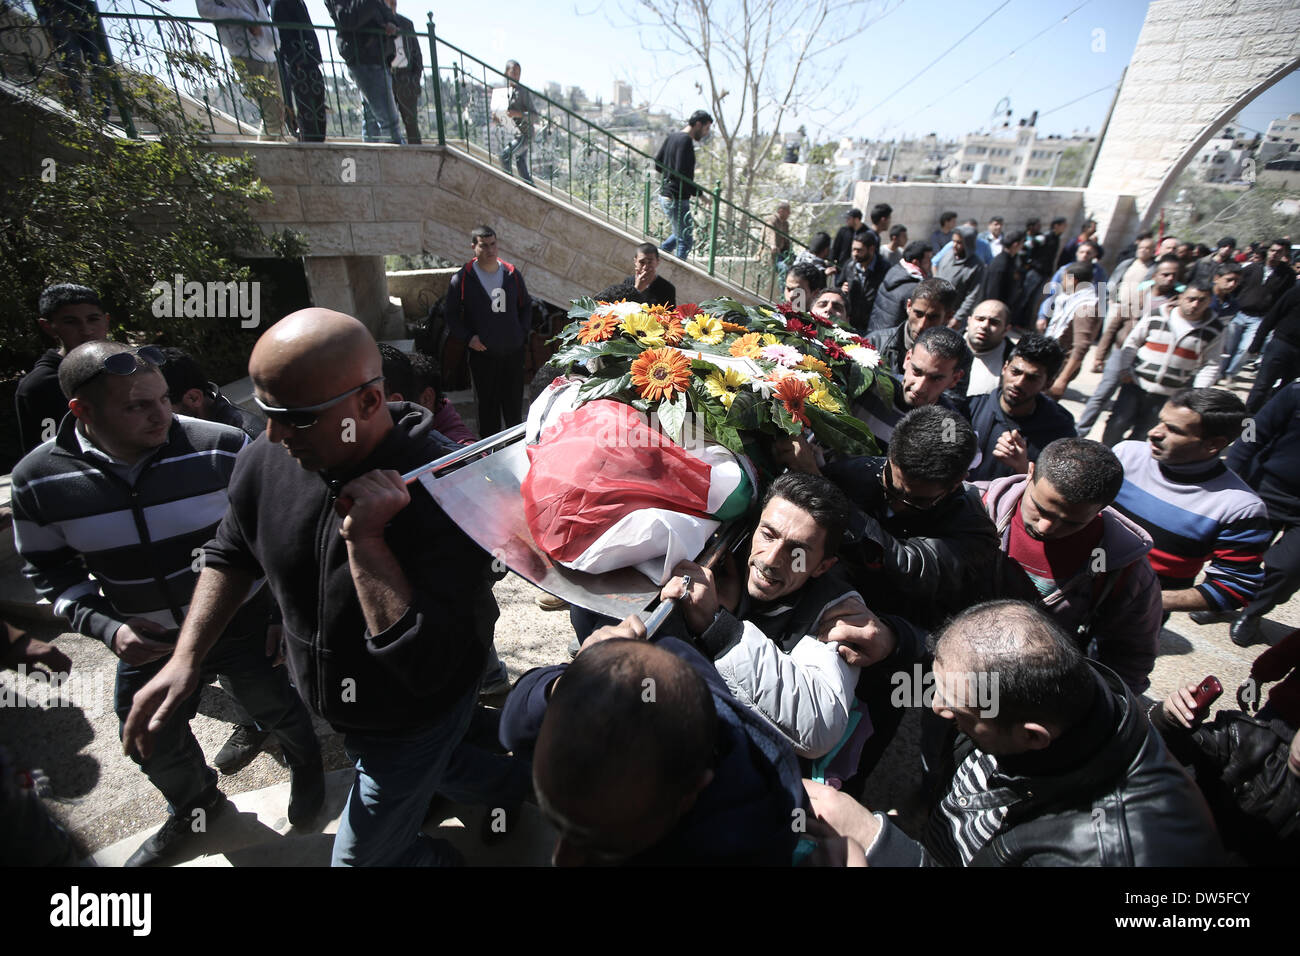 Ramallah. 28th Feb, 2014. Palestinians carry the body of Muataz Washaha during his funeral in Bir Zeit village near the West Bank city of Ramallah on Feb. 28, 2014. Israeli forces shot dead Muataz Washaha in the West Bank on Thursday. The military and police said the killed was plotting terror attacks. Credit:  Fadi Arouri/Xinhua/Alamy Live News Stock Photo